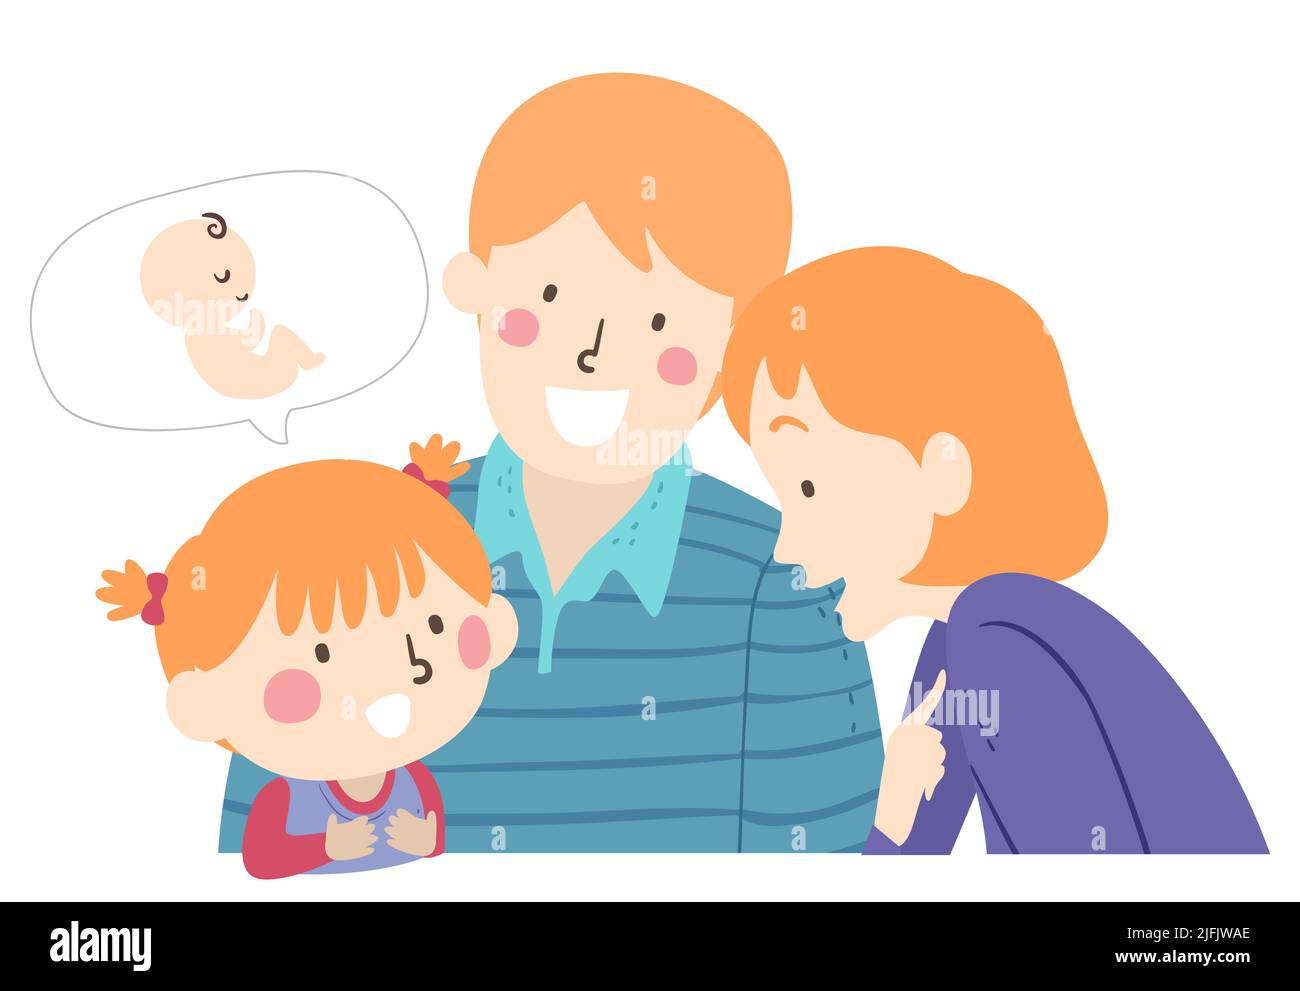 Illustration of Kid Girl Asking Parents Questions About a Baby in Speech Bubble Stock Photo